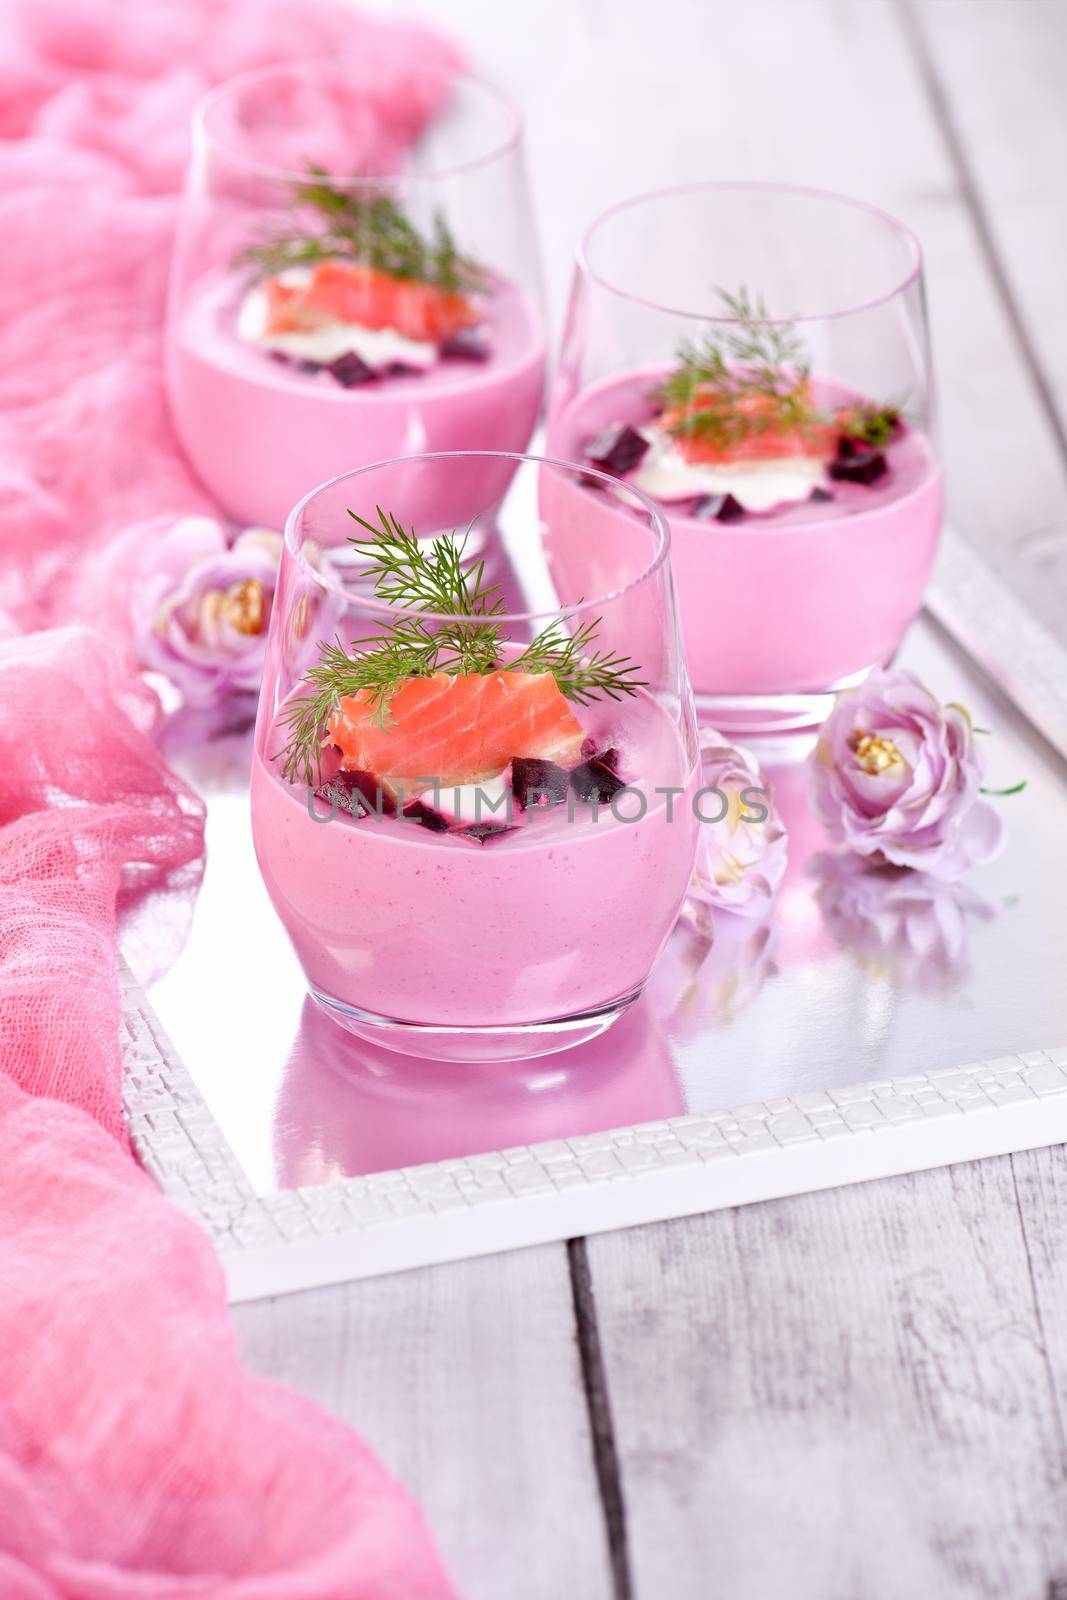 Salmon with beetroot mousse with the most delicate, soft texture combined with horseradish and cream cheese is a wonderful combination of taste. A delicious holiday appetizer.